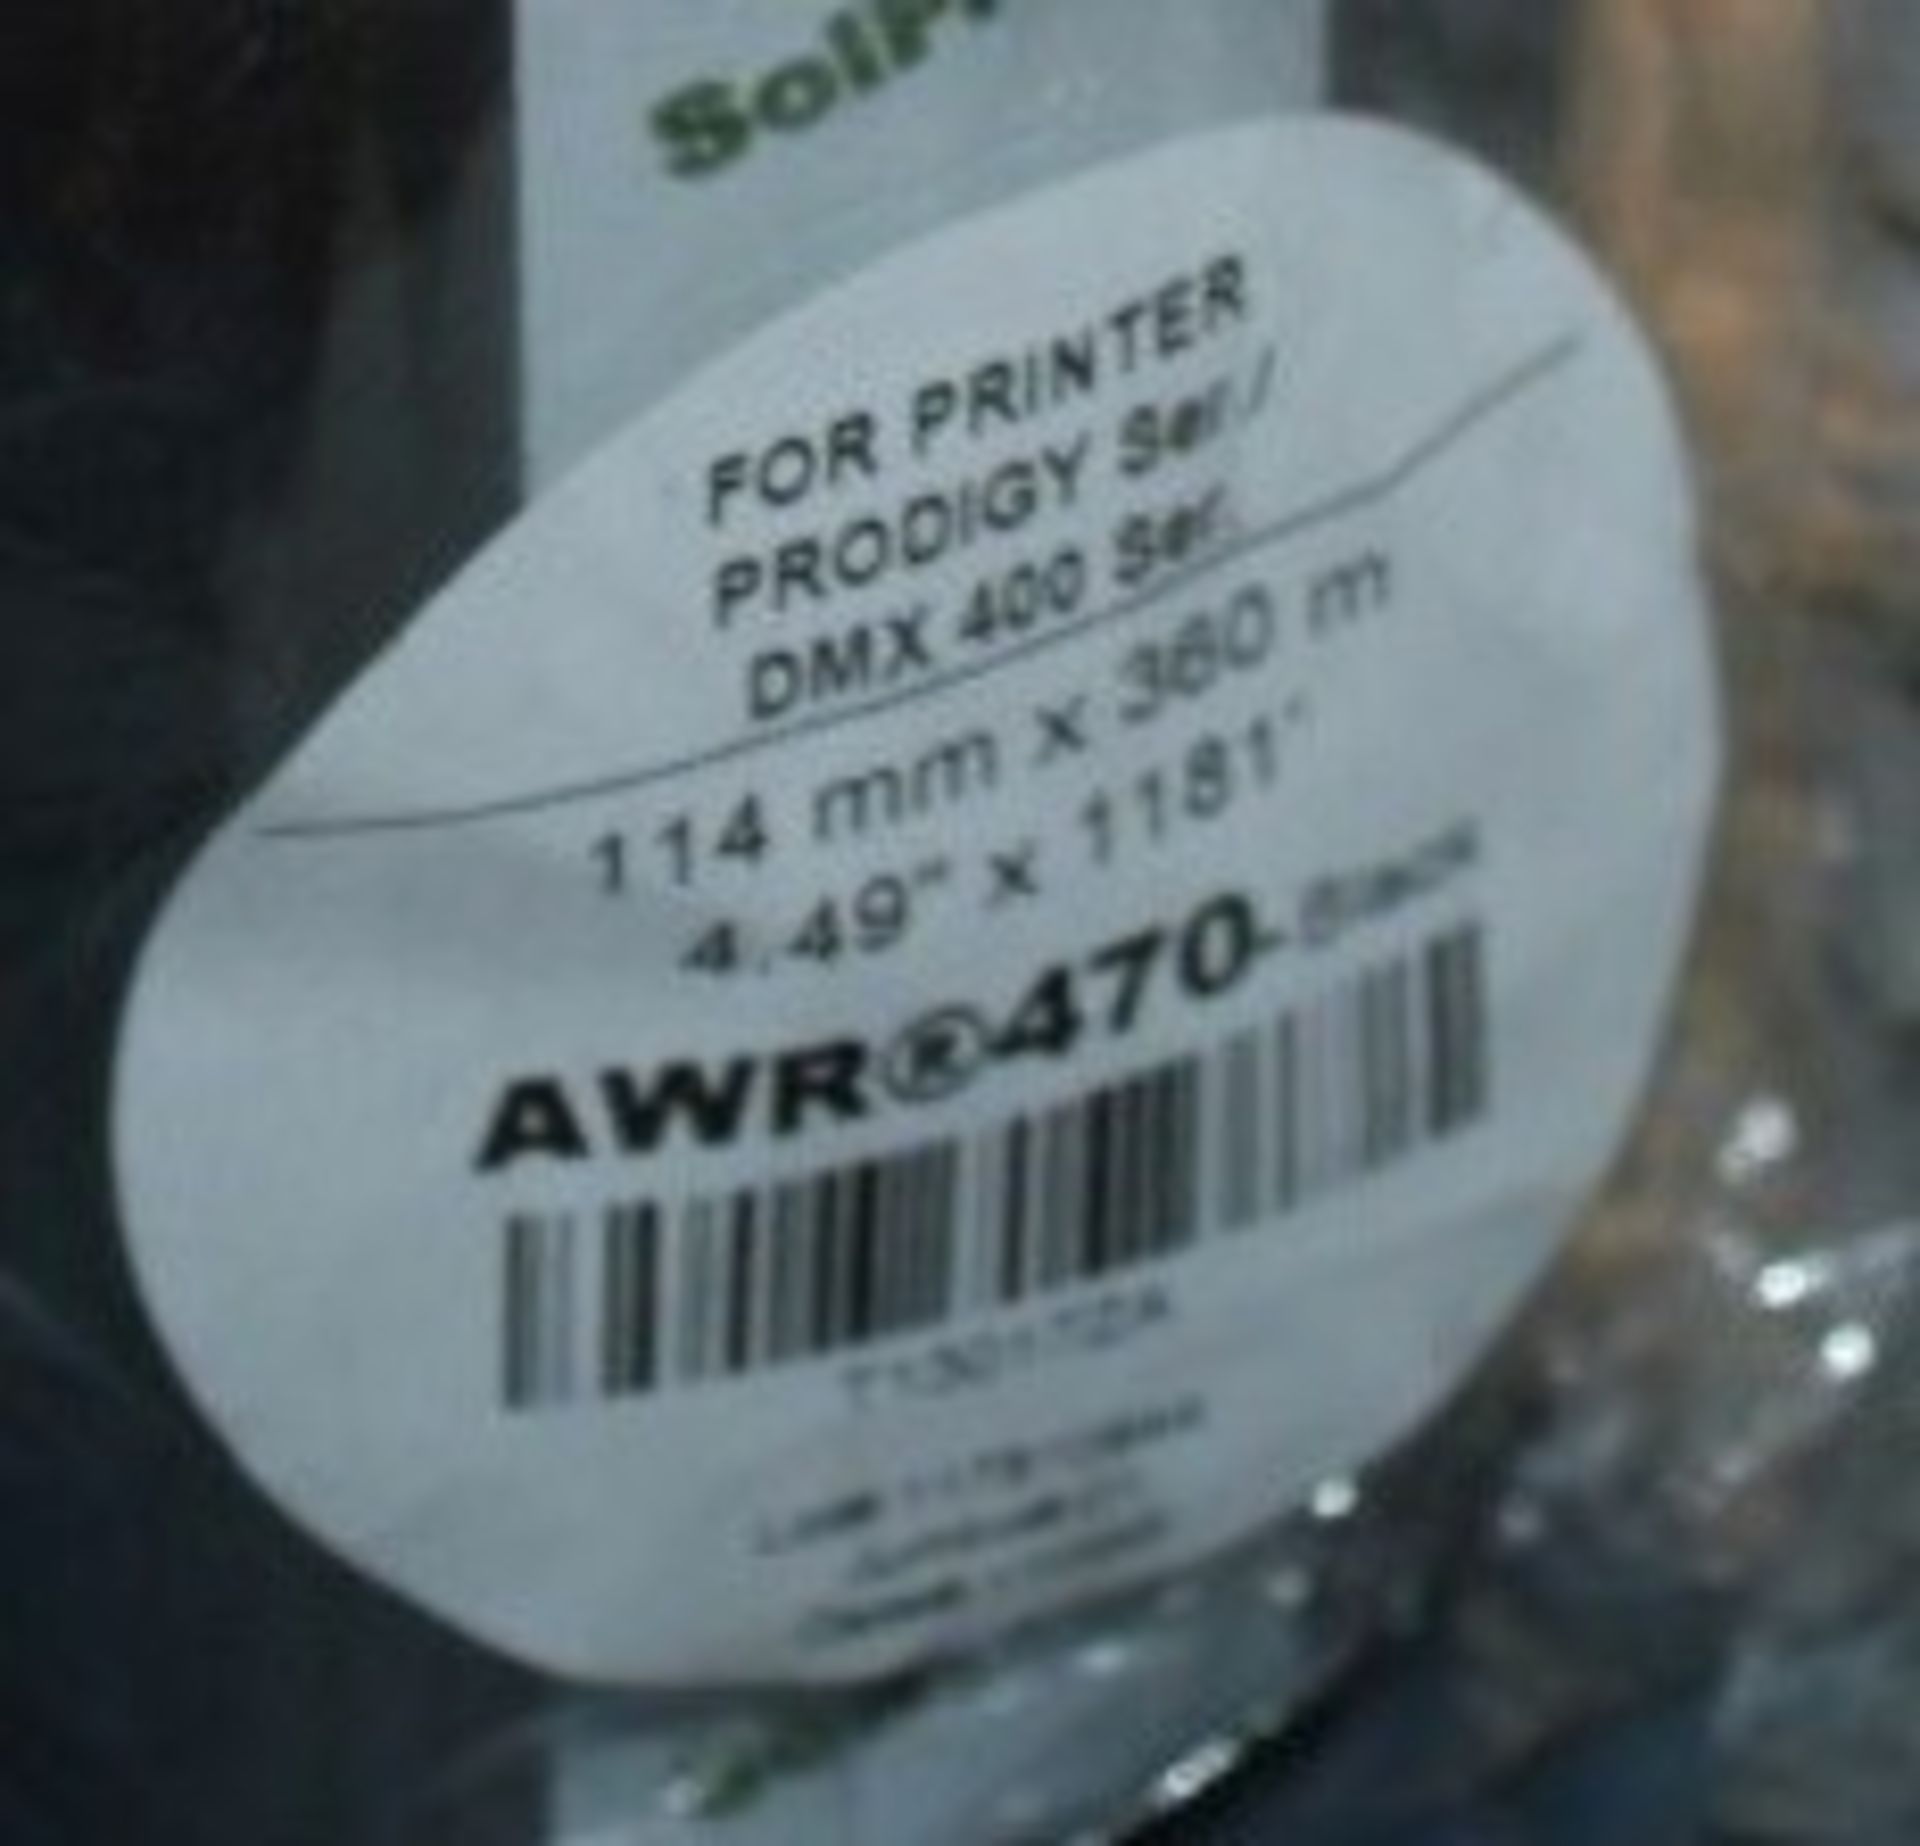 20 x Thermal Printer Rolls - For DMS 400 Series Label Printers - 114mm x 360m - Product Code AWR 470 - Image 2 of 2